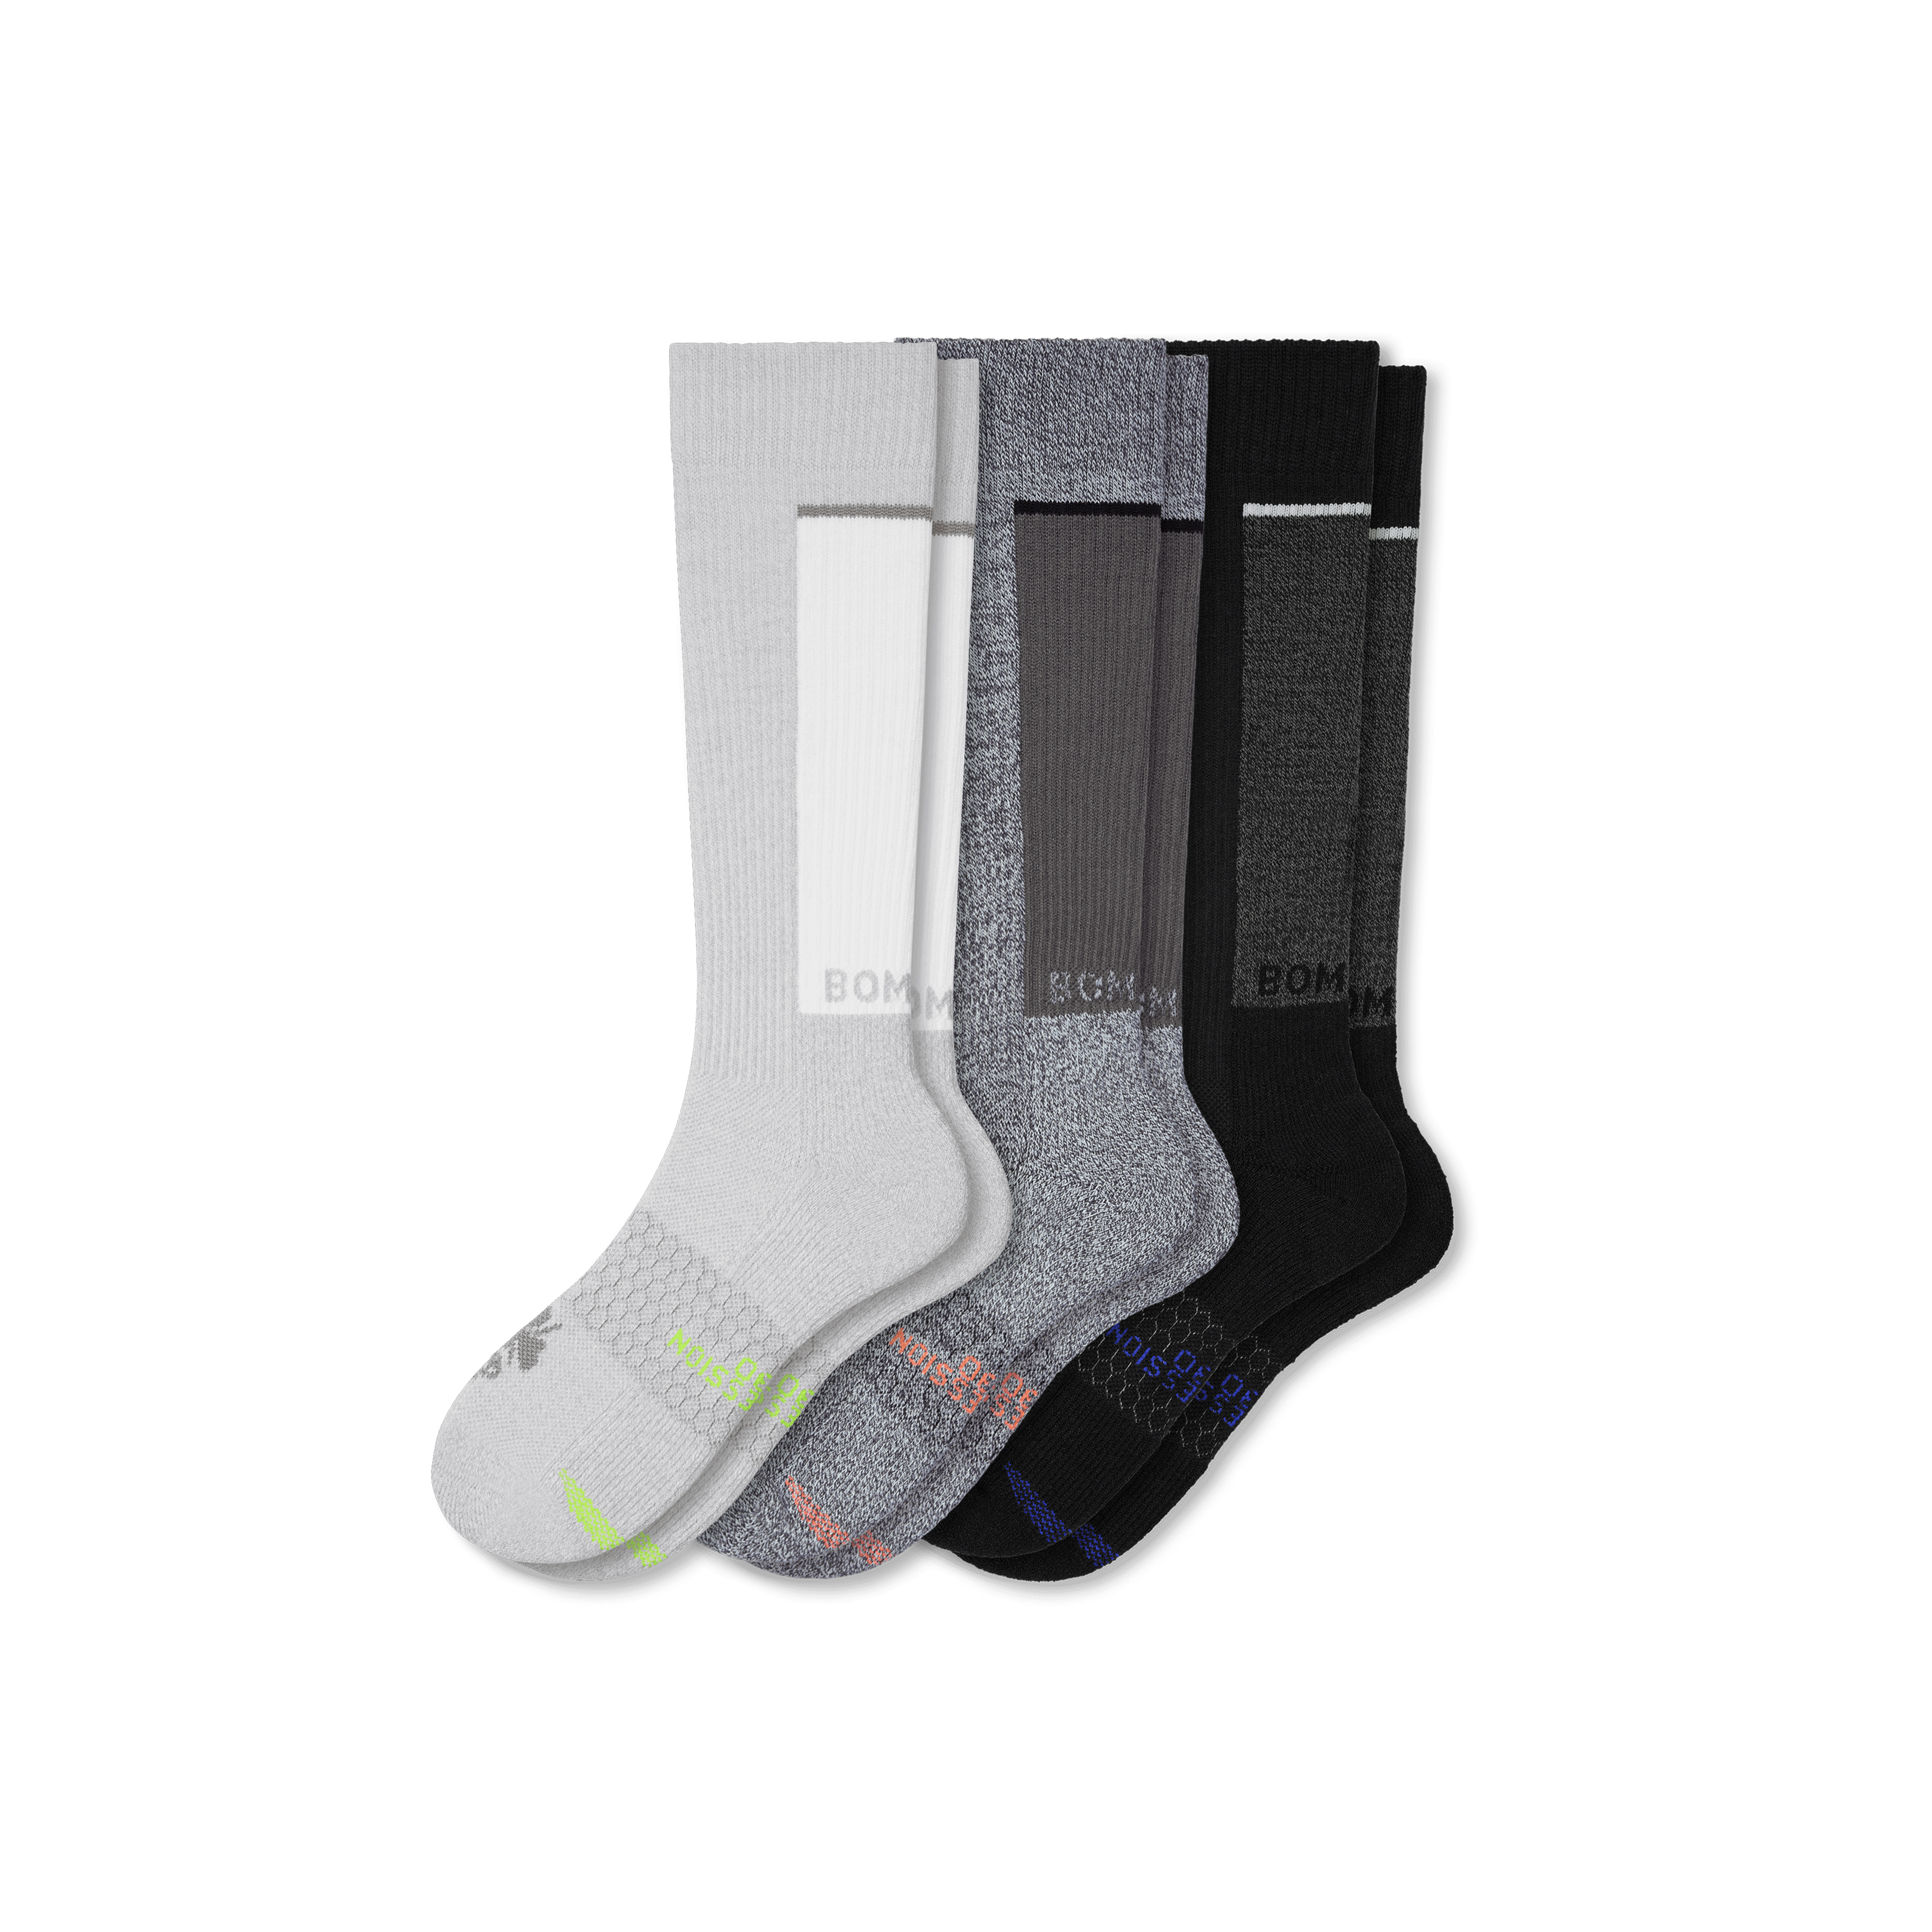 Bombas Performance Compression Sock 3-pack (20-30mmhg) In Black Charcoal Grey